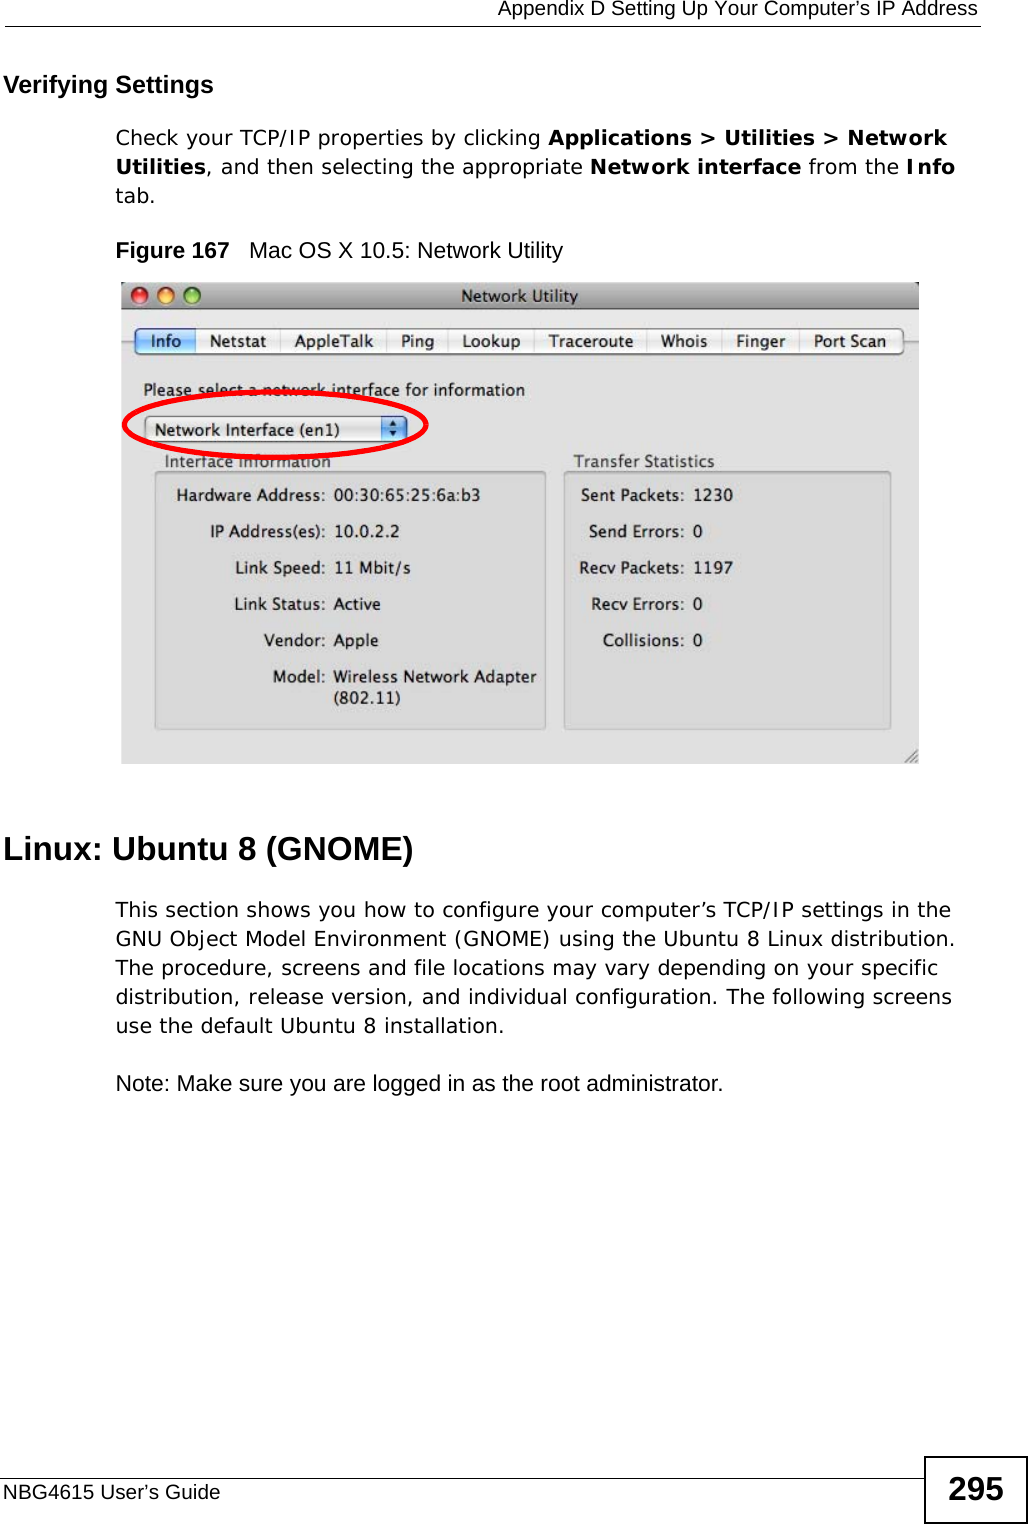  Appendix D Setting Up Your Computer’s IP AddressNBG4615 User’s Guide 295Verifying SettingsCheck your TCP/IP properties by clicking Applications &gt; Utilities &gt; Network Utilities, and then selecting the appropriate Network interface from the Info tab.Figure 167   Mac OS X 10.5: Network UtilityLinux: Ubuntu 8 (GNOME)This section shows you how to configure your computer’s TCP/IP settings in the GNU Object Model Environment (GNOME) using the Ubuntu 8 Linux distribution. The procedure, screens and file locations may vary depending on your specific distribution, release version, and individual configuration. The following screens use the default Ubuntu 8 installation.Note: Make sure you are logged in as the root administrator. 